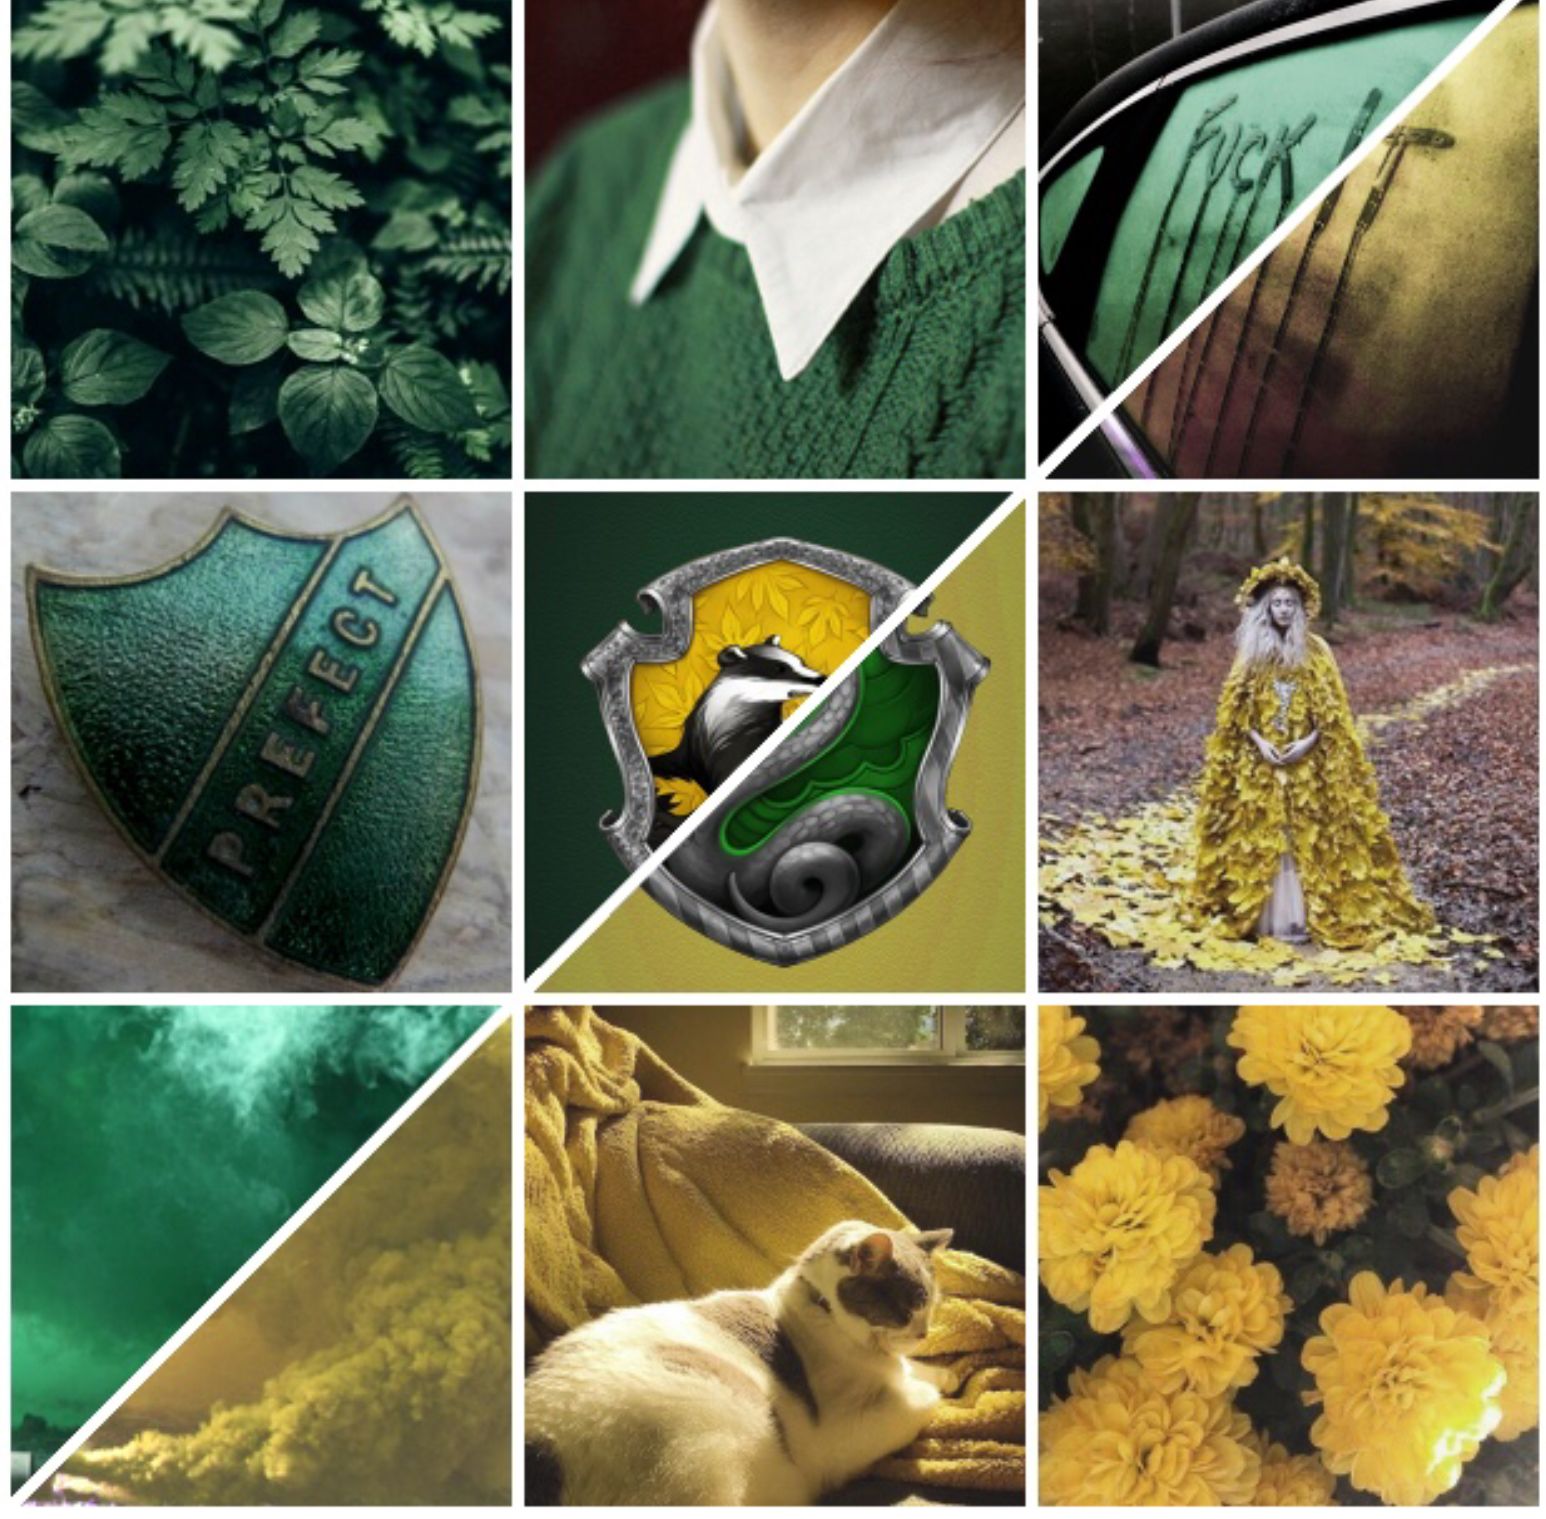 Slytherpuff aesthetic. Harry potter wallpaper, Slytherin and hufflepuff, Harry potter memes